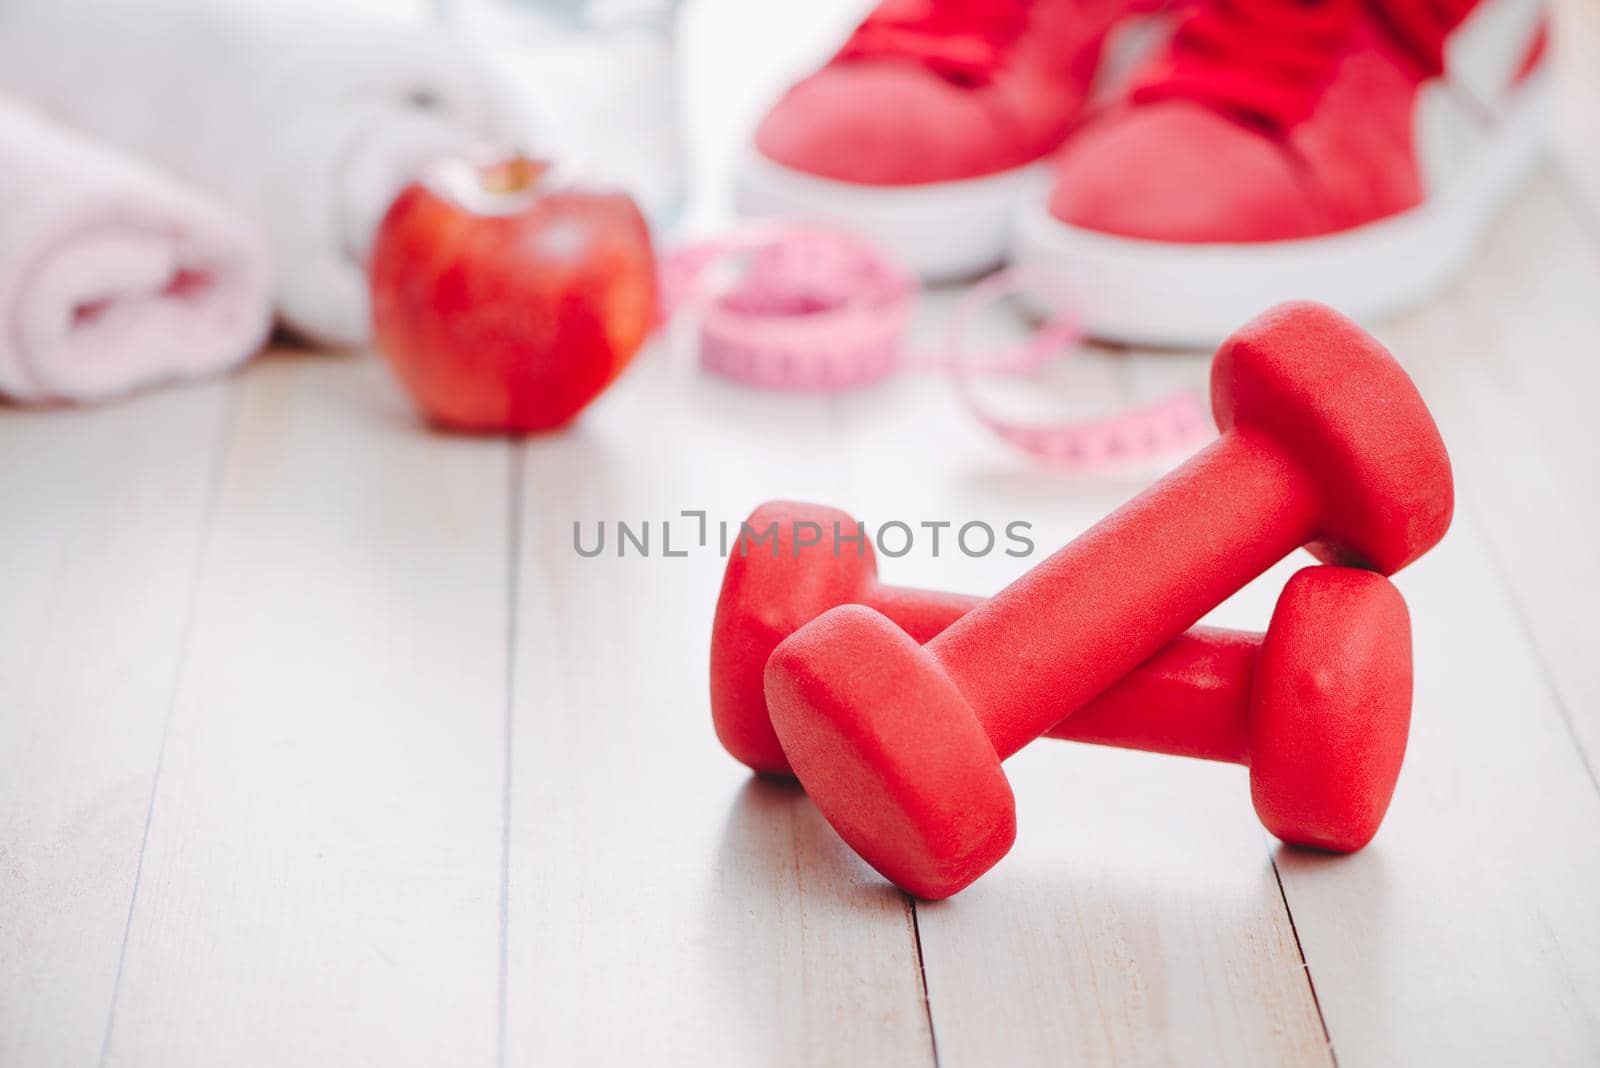 Fitness, healthy and active lifestyles Concept, dumbbells, sport shoes, bottle of waters and apple on wood background. by makidotvn